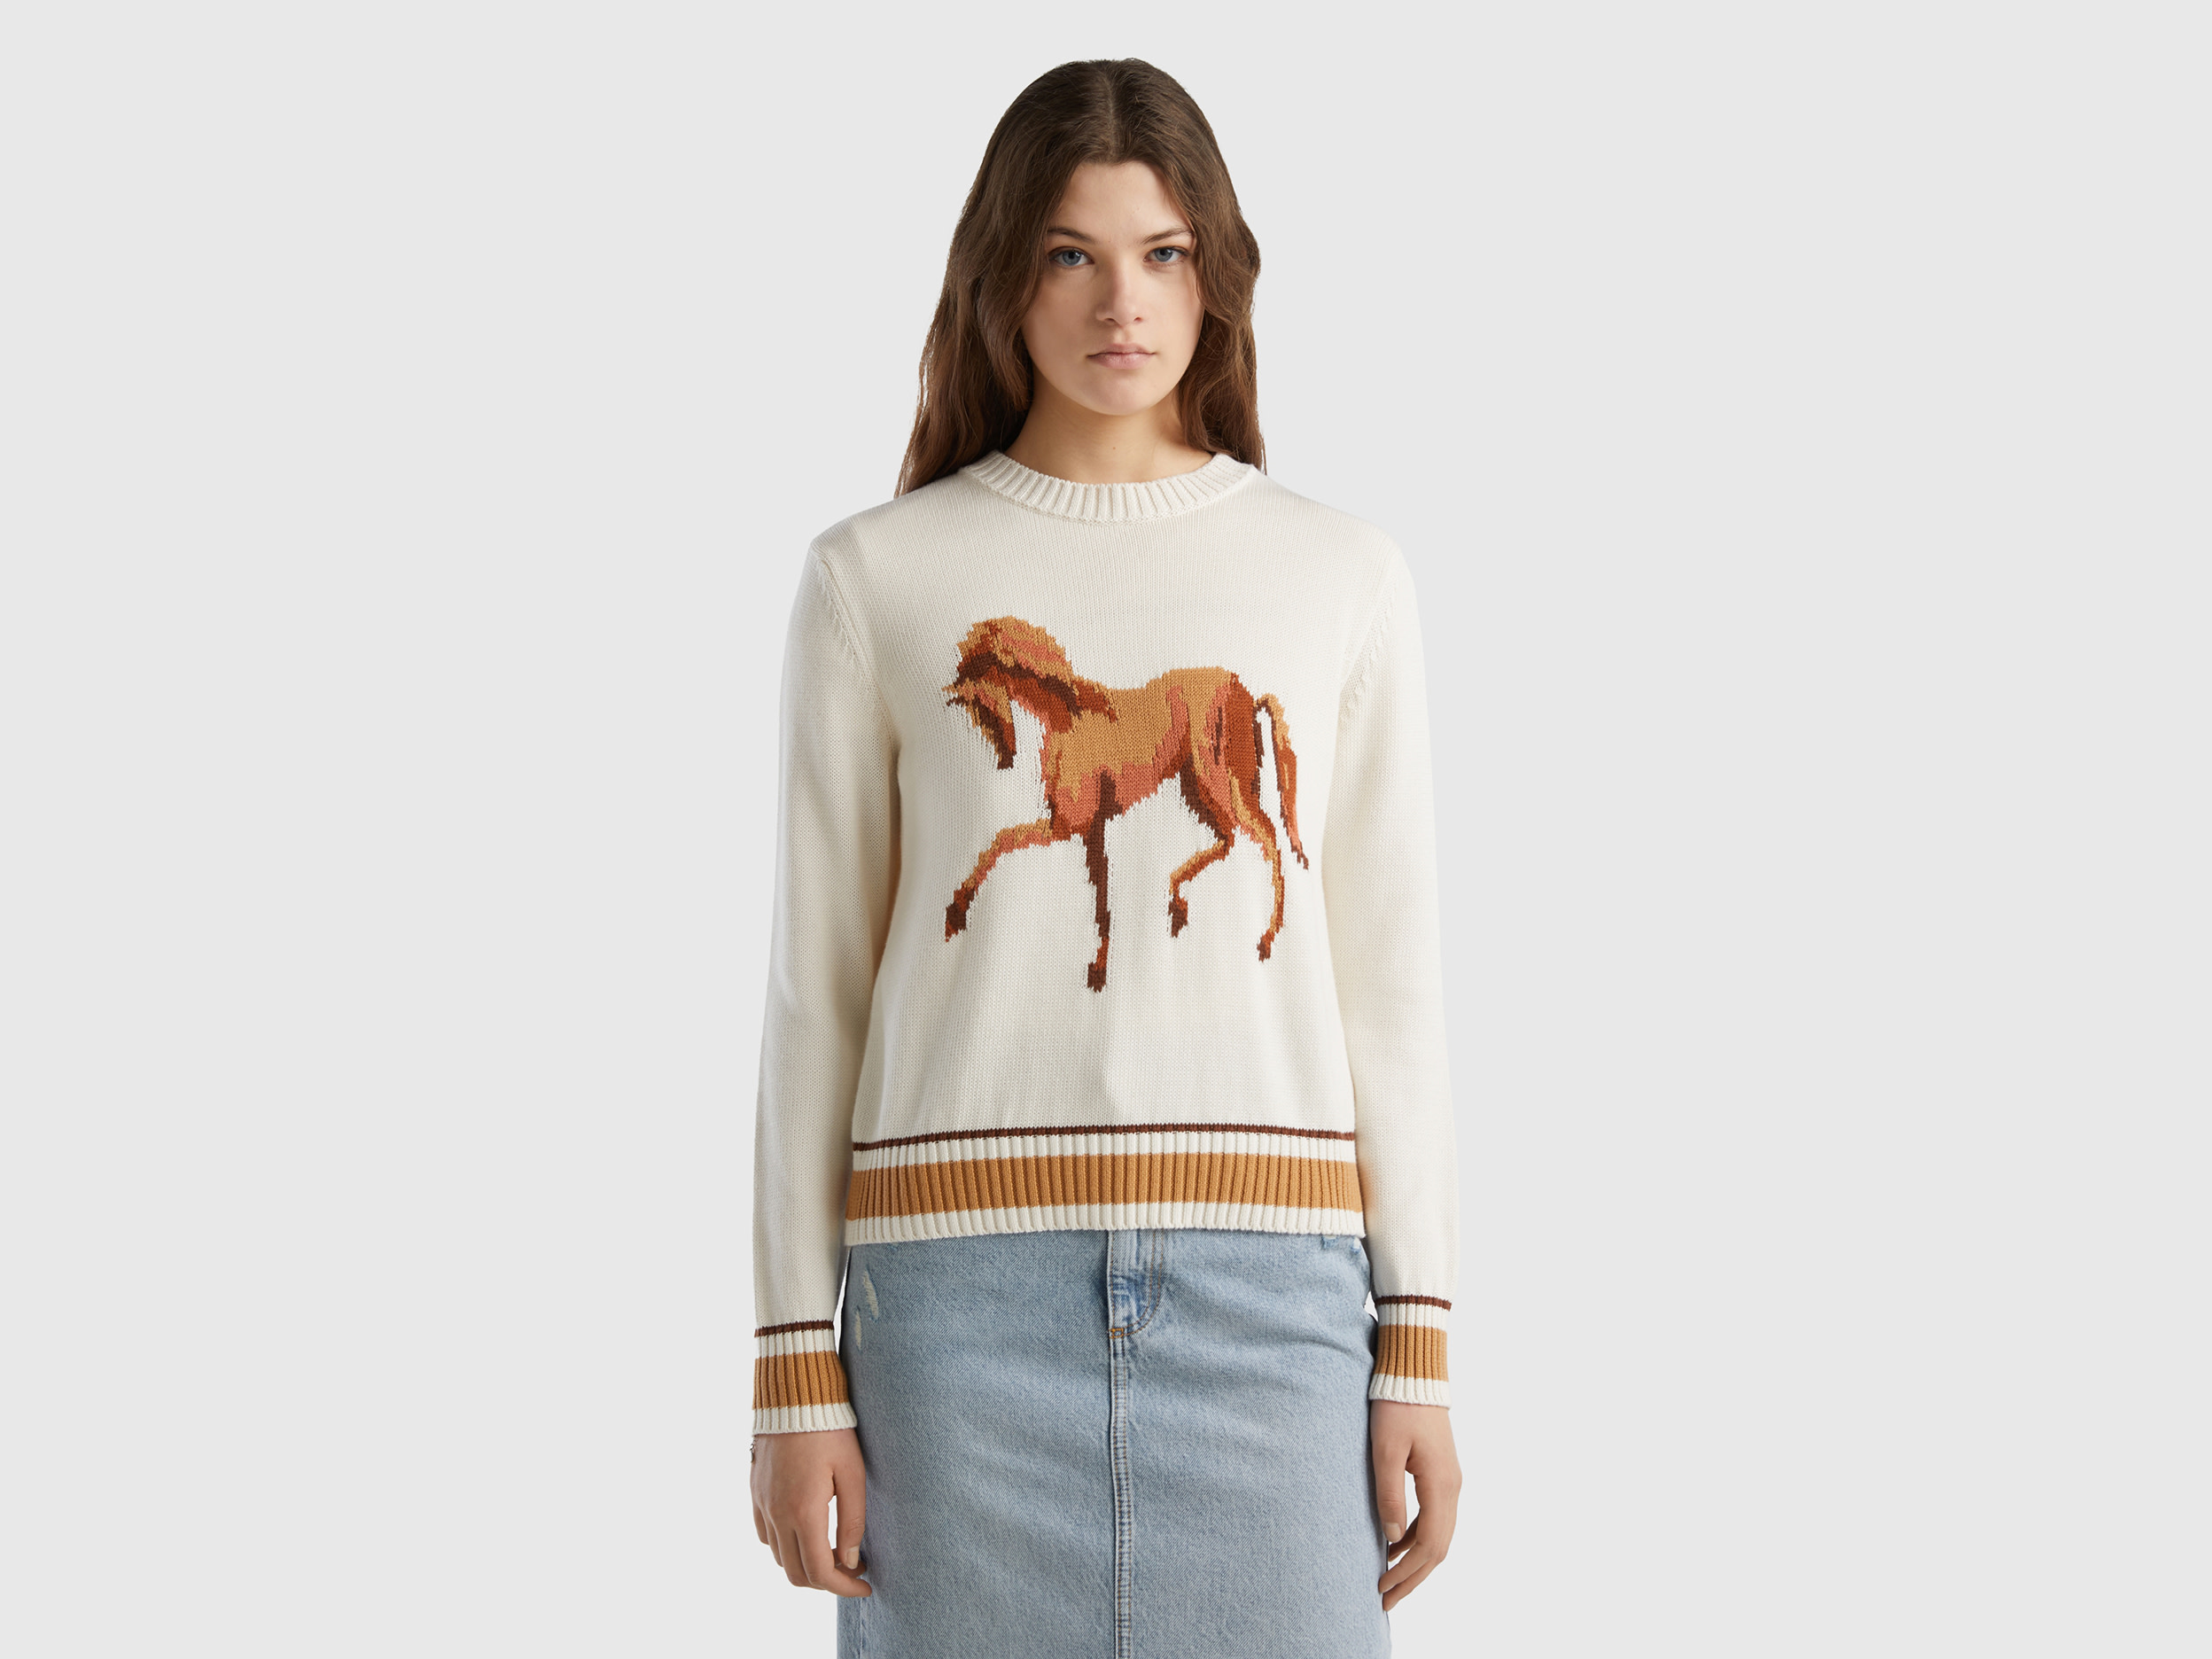 Benetton, Sweater With Horse Inlay, size L, Creamy White, Women